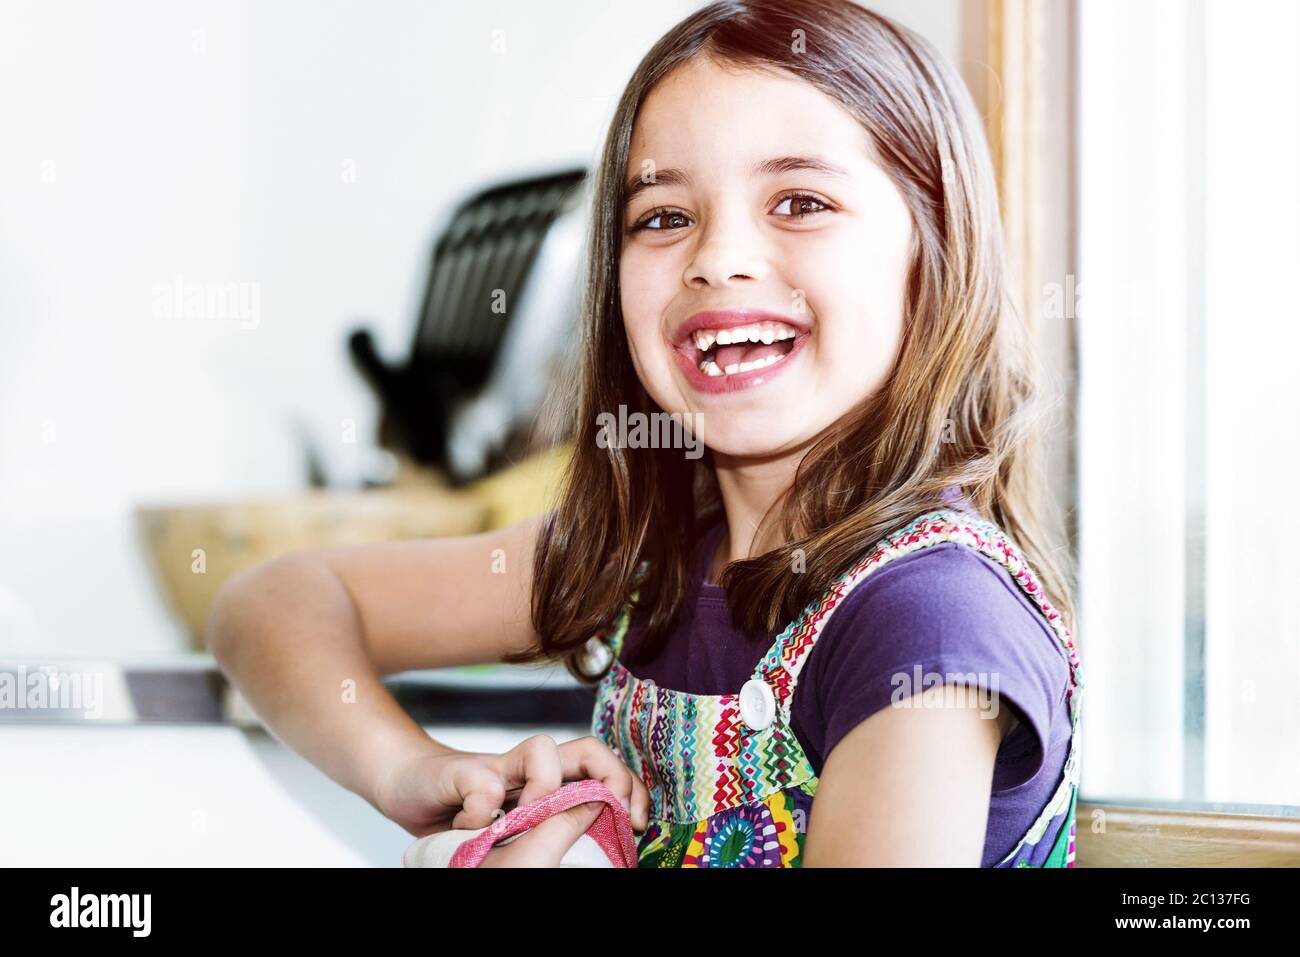 very cute kid girl wiping the dishes Stock Photo